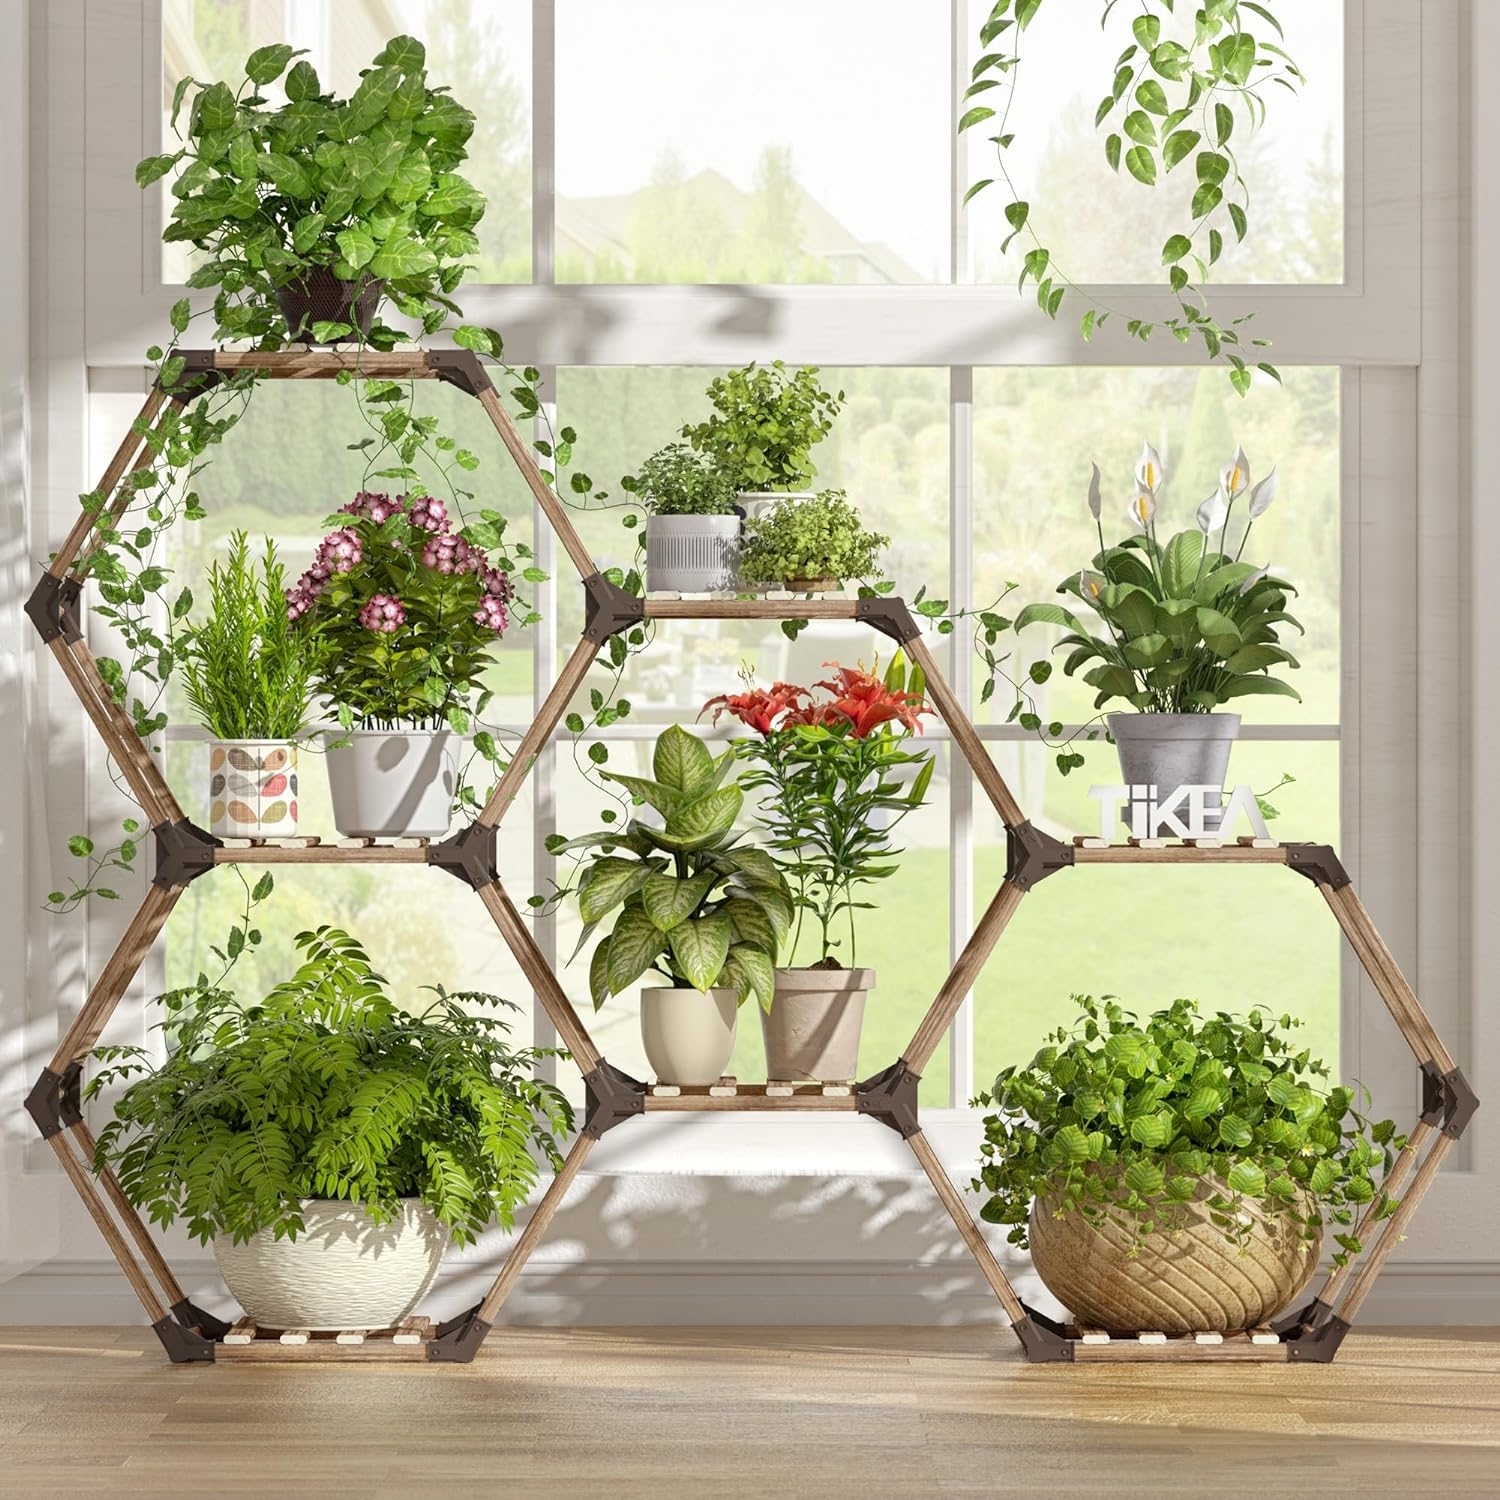 Various potted plants arranged on a multi-tiered, hexagonal shelving unit in a bright room